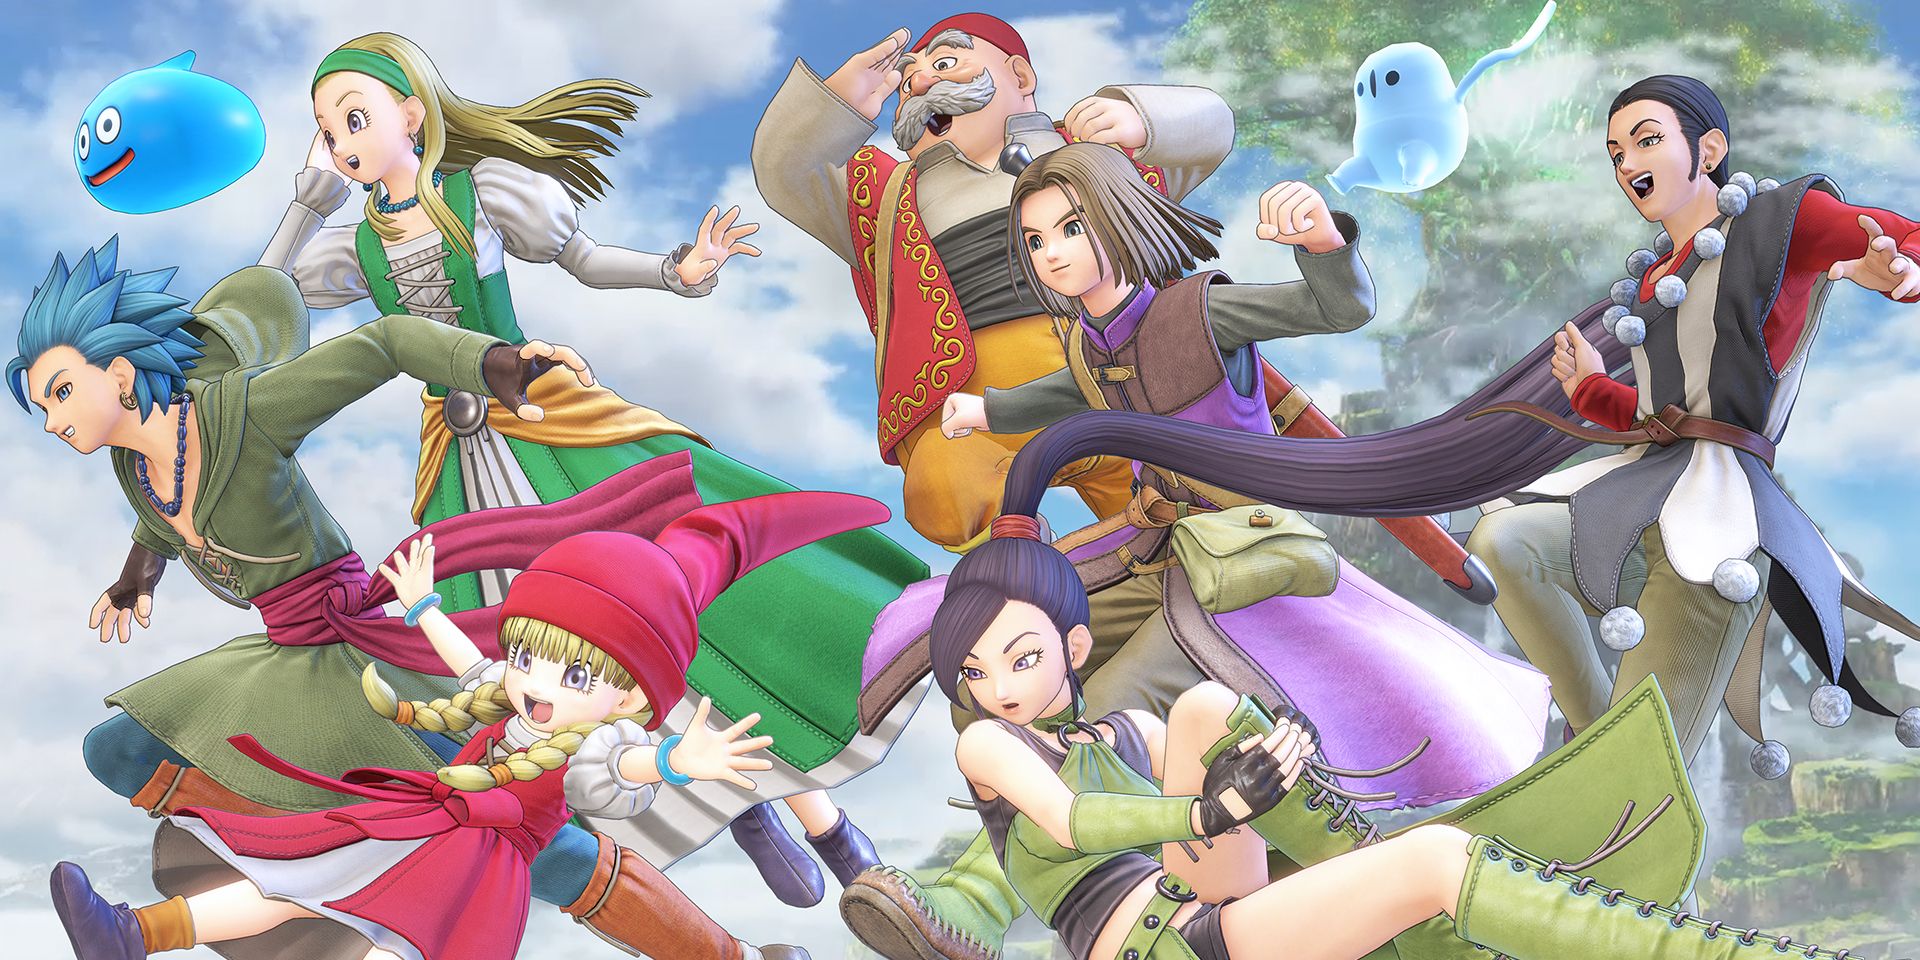 Dragon Quest 11 Definitive Edition Art of all the main characters